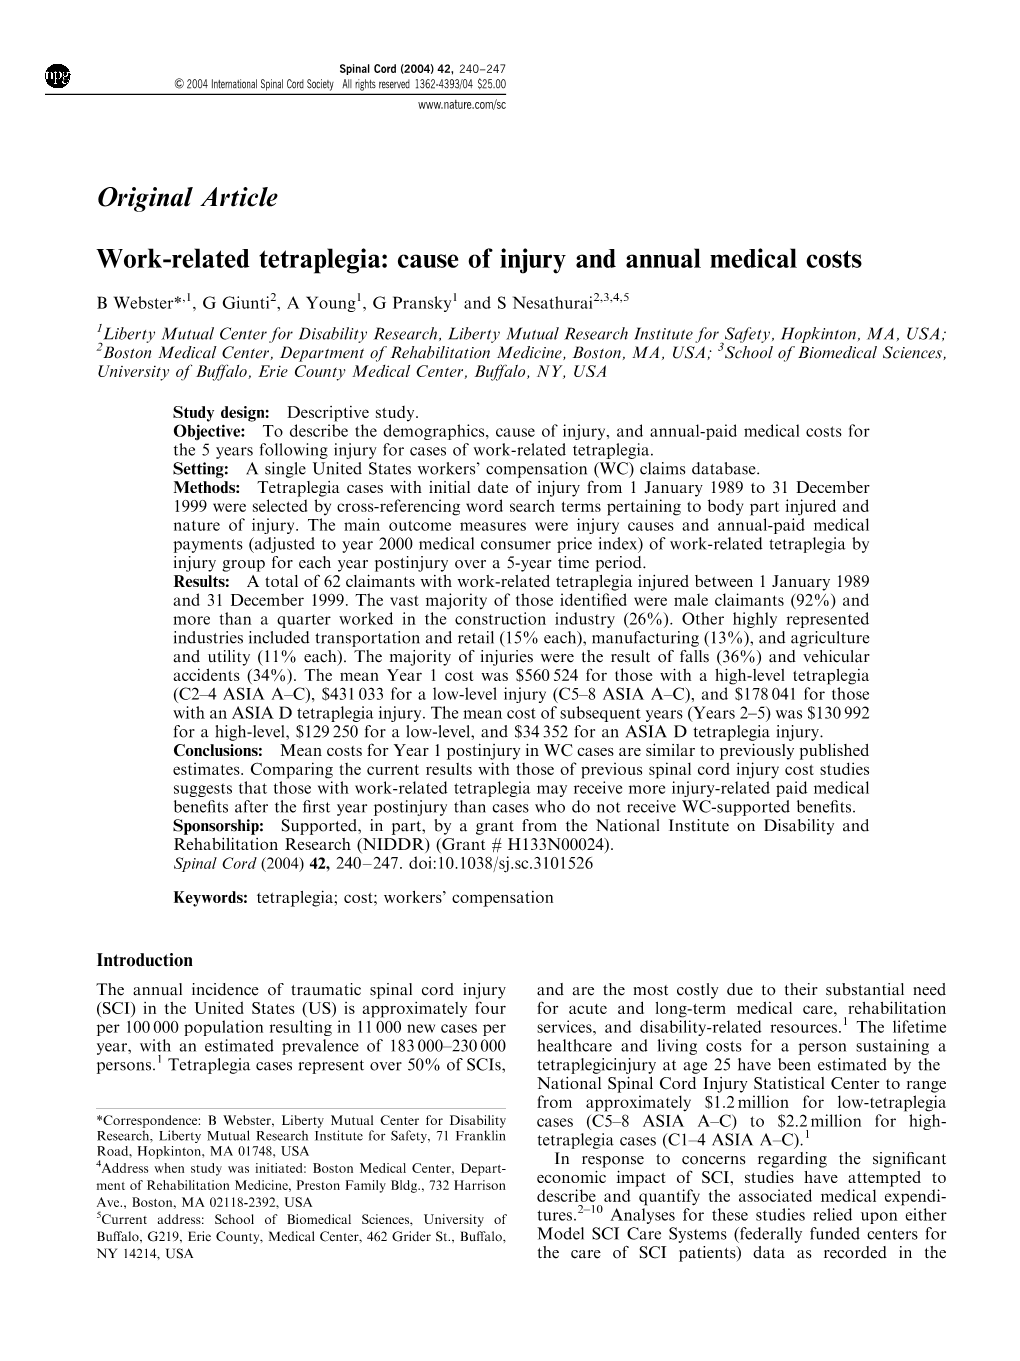 Work-Related Tetraplegia: Cause of Injury and Annual Medical Costs